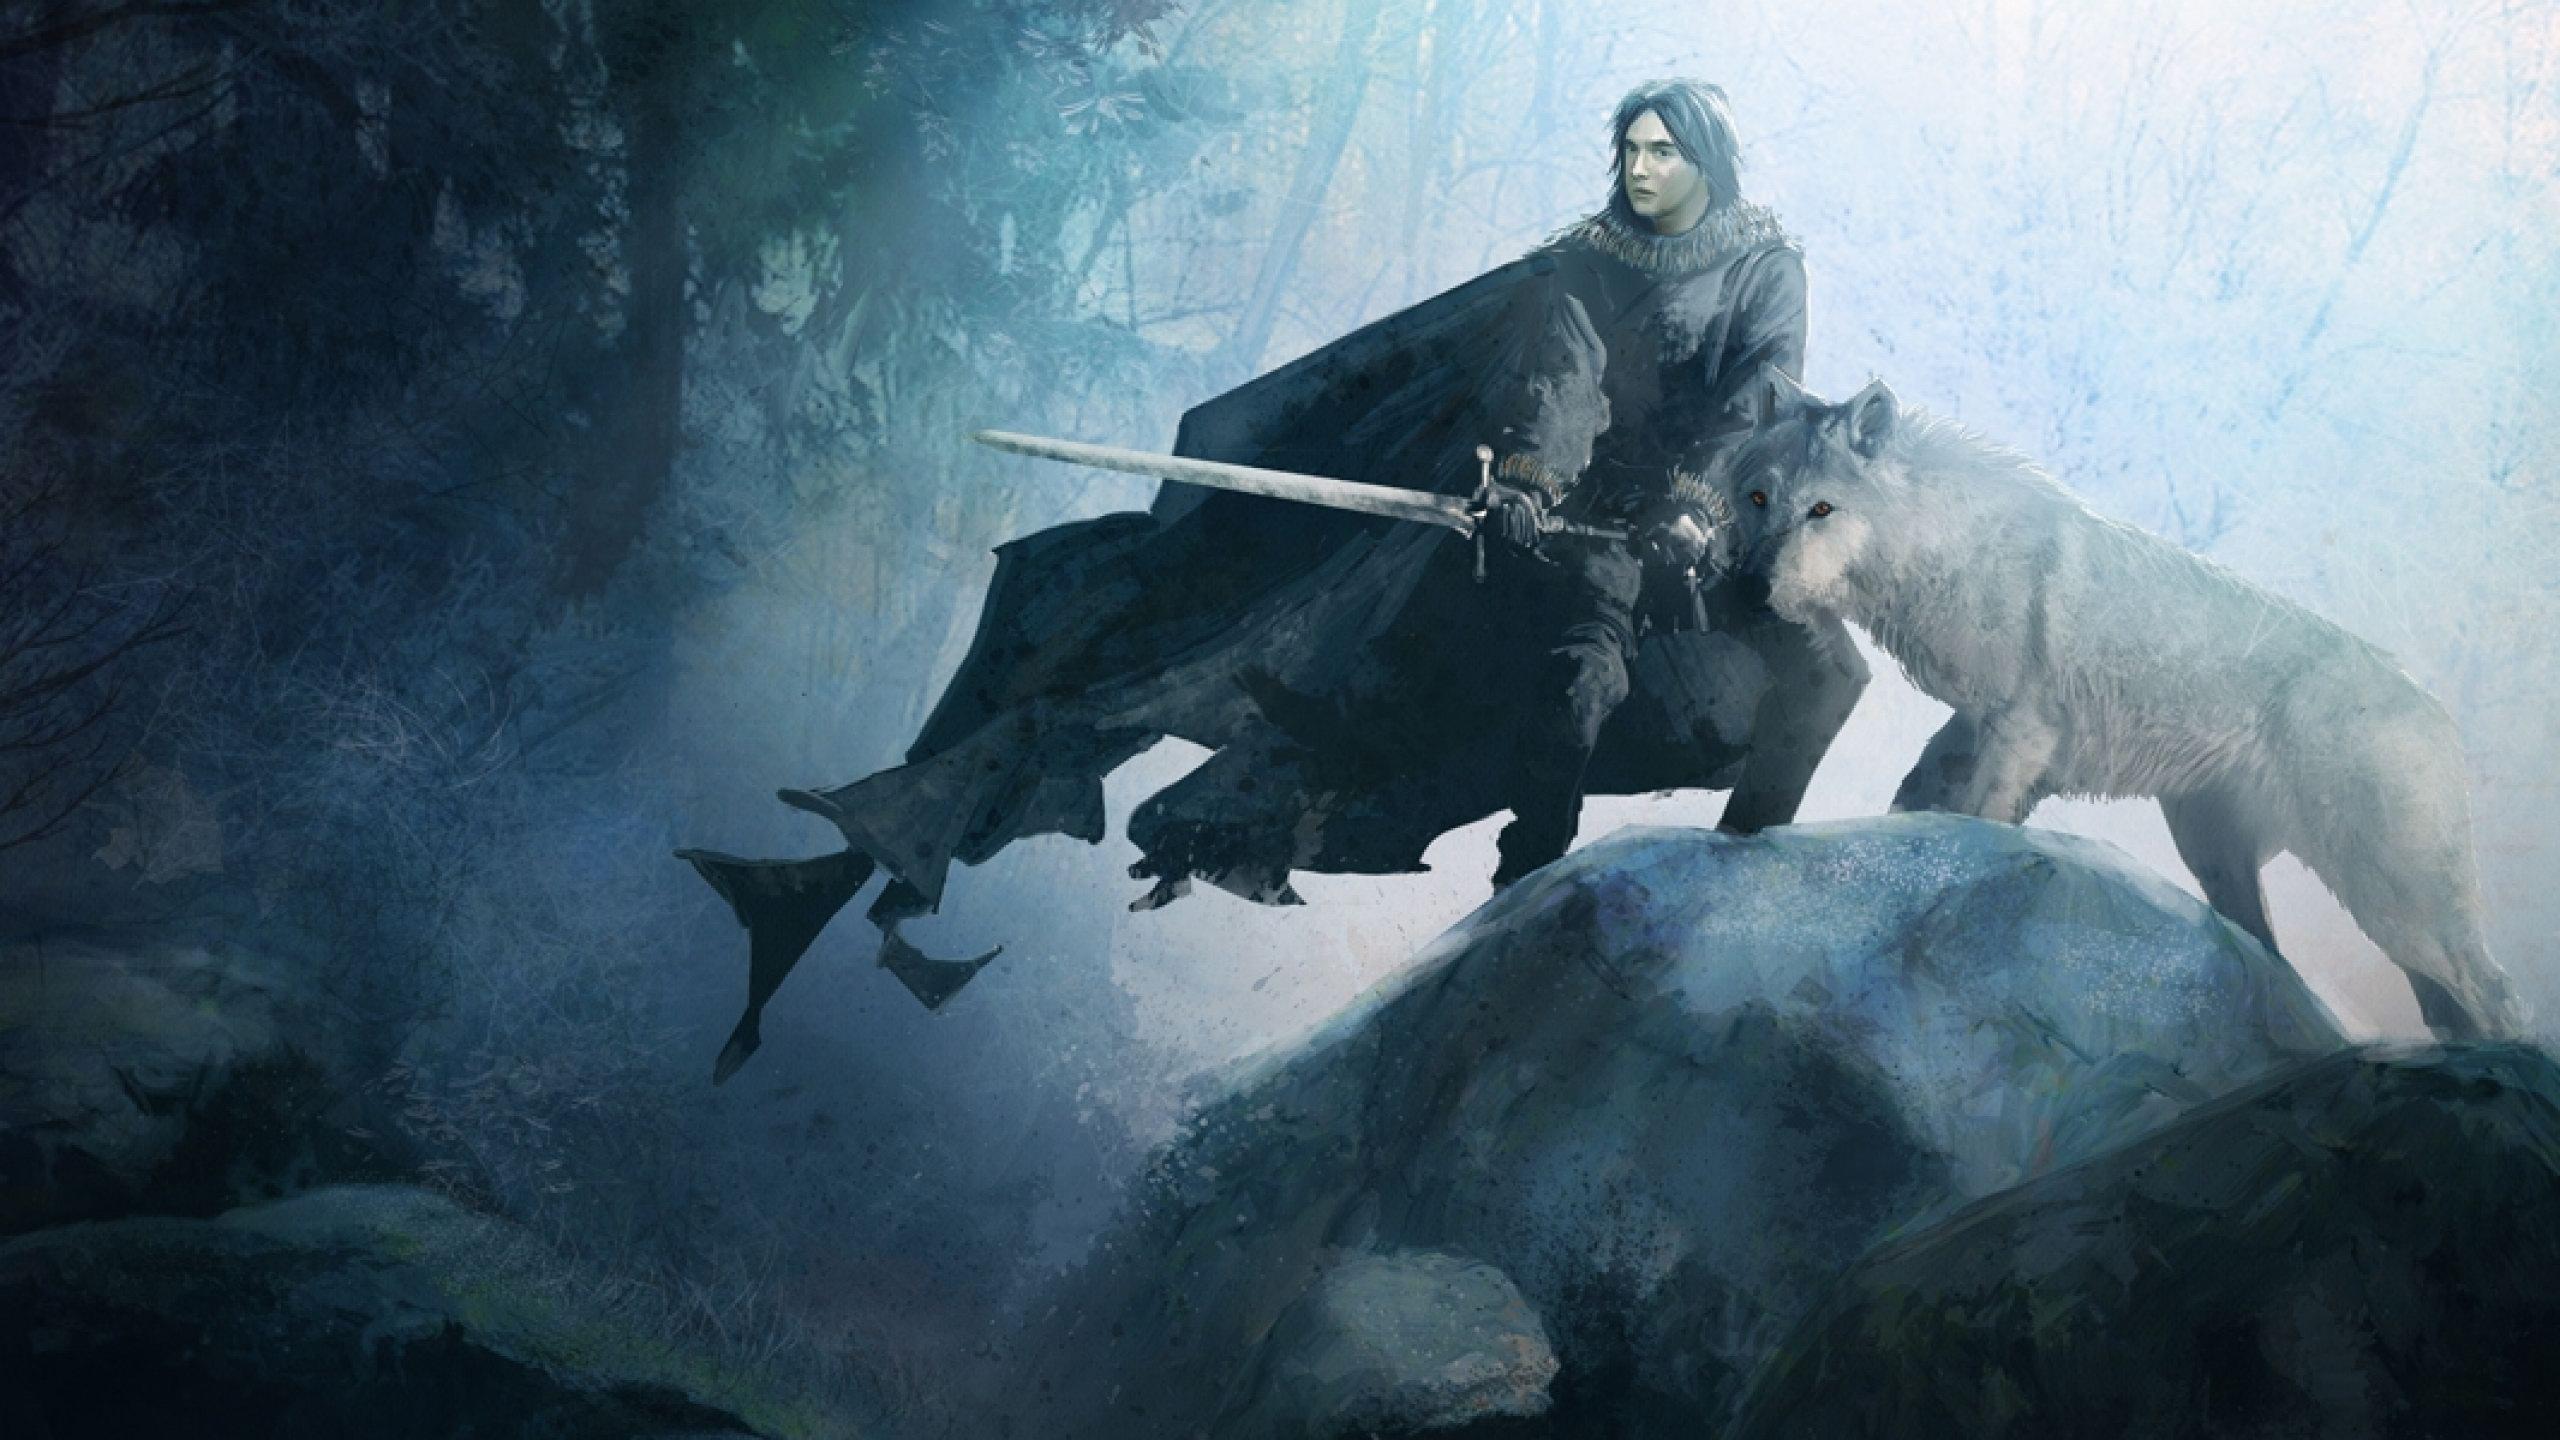 Game of Thrones Jon Snow   Wallpaper High Definition High Quality 2560x1440